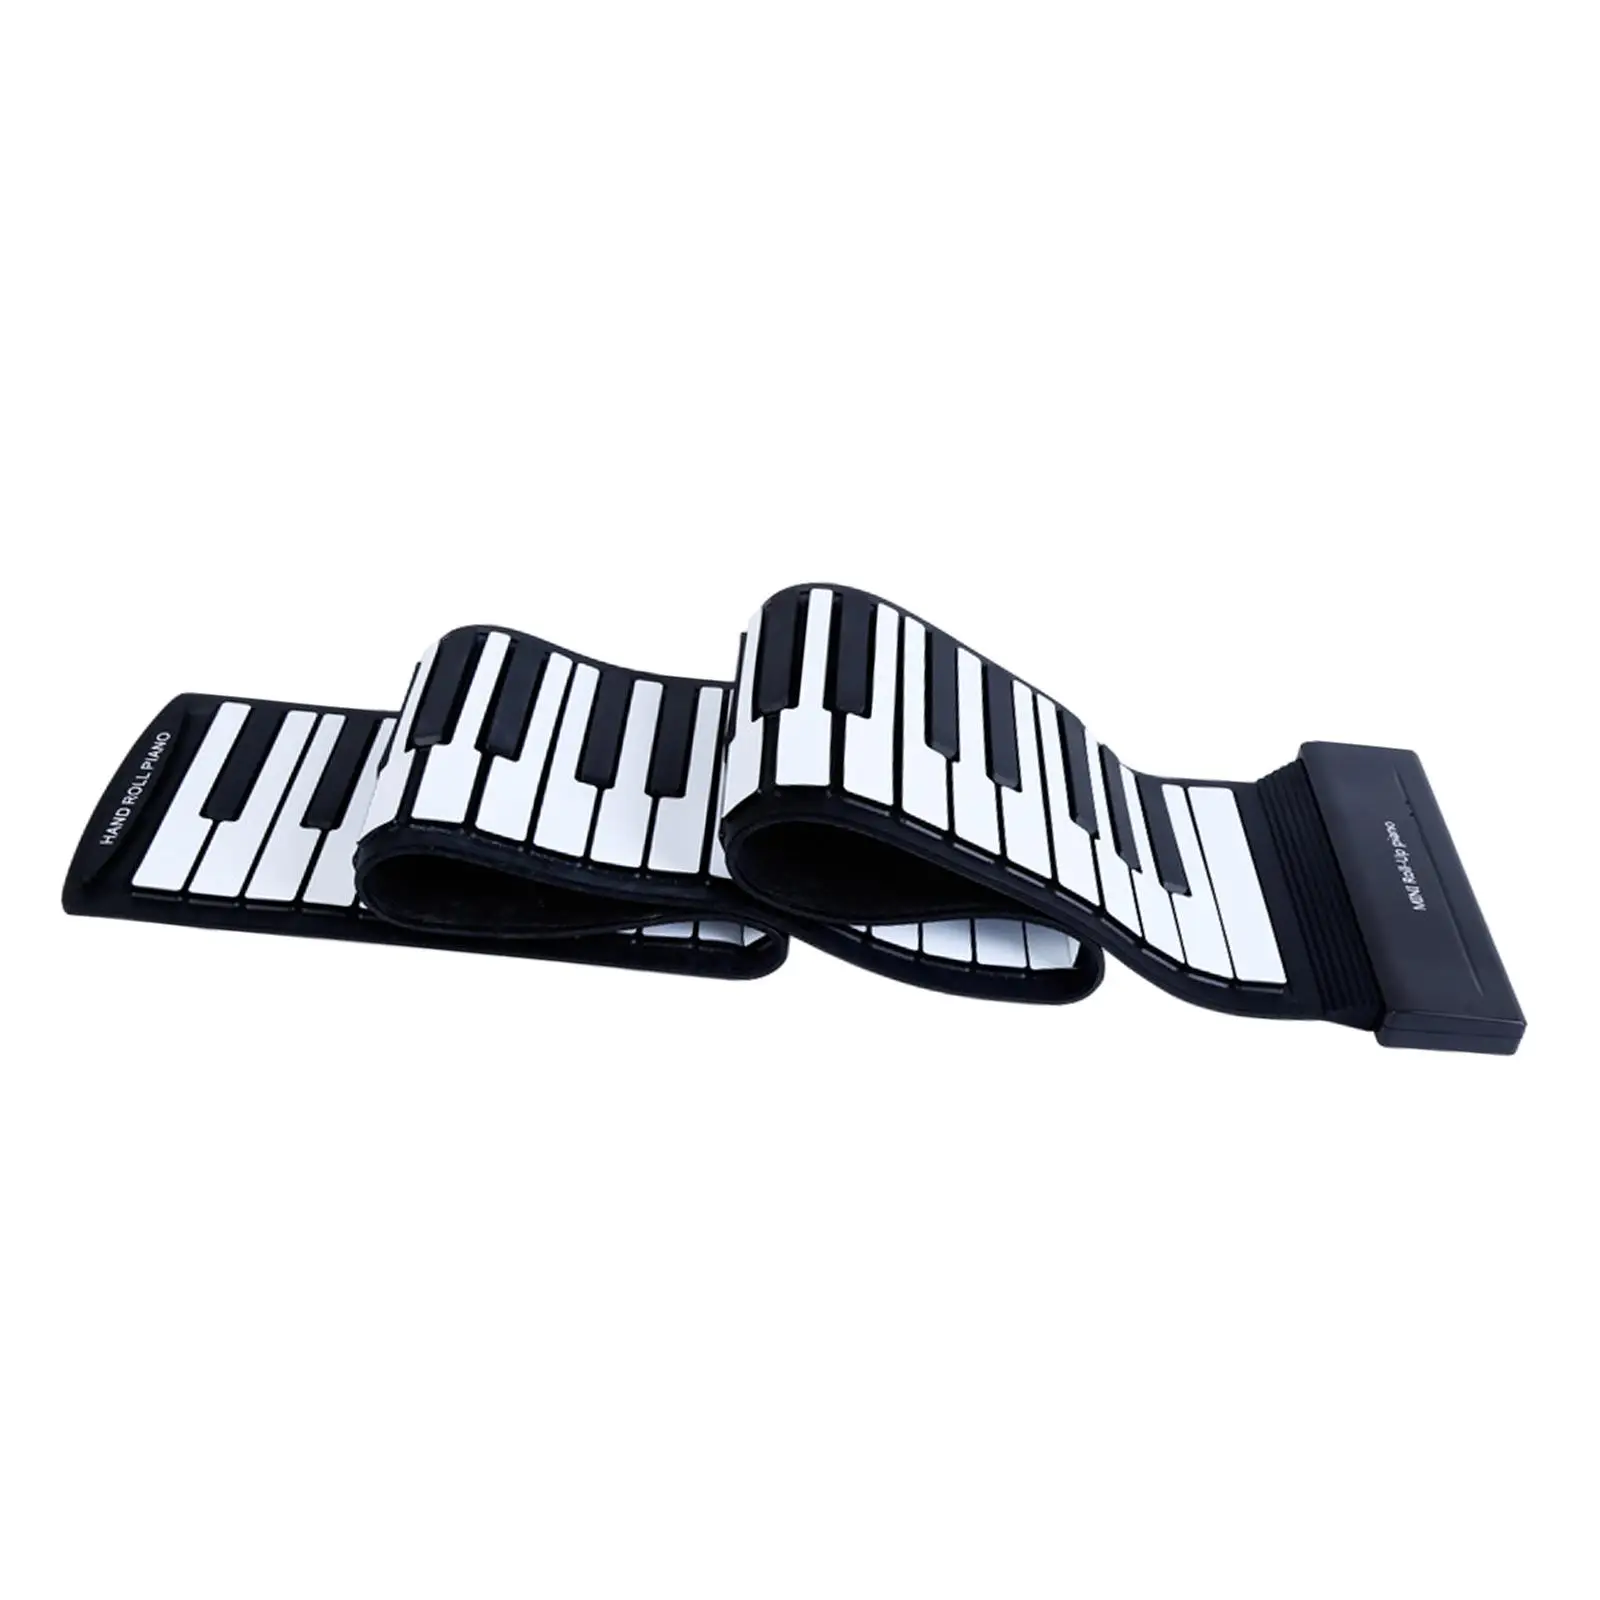 

88 Keys Roll up Piano USB Input Multipurpose Foldable Digital Music Toy for Programming Home Living Room Holiday Gift Kids